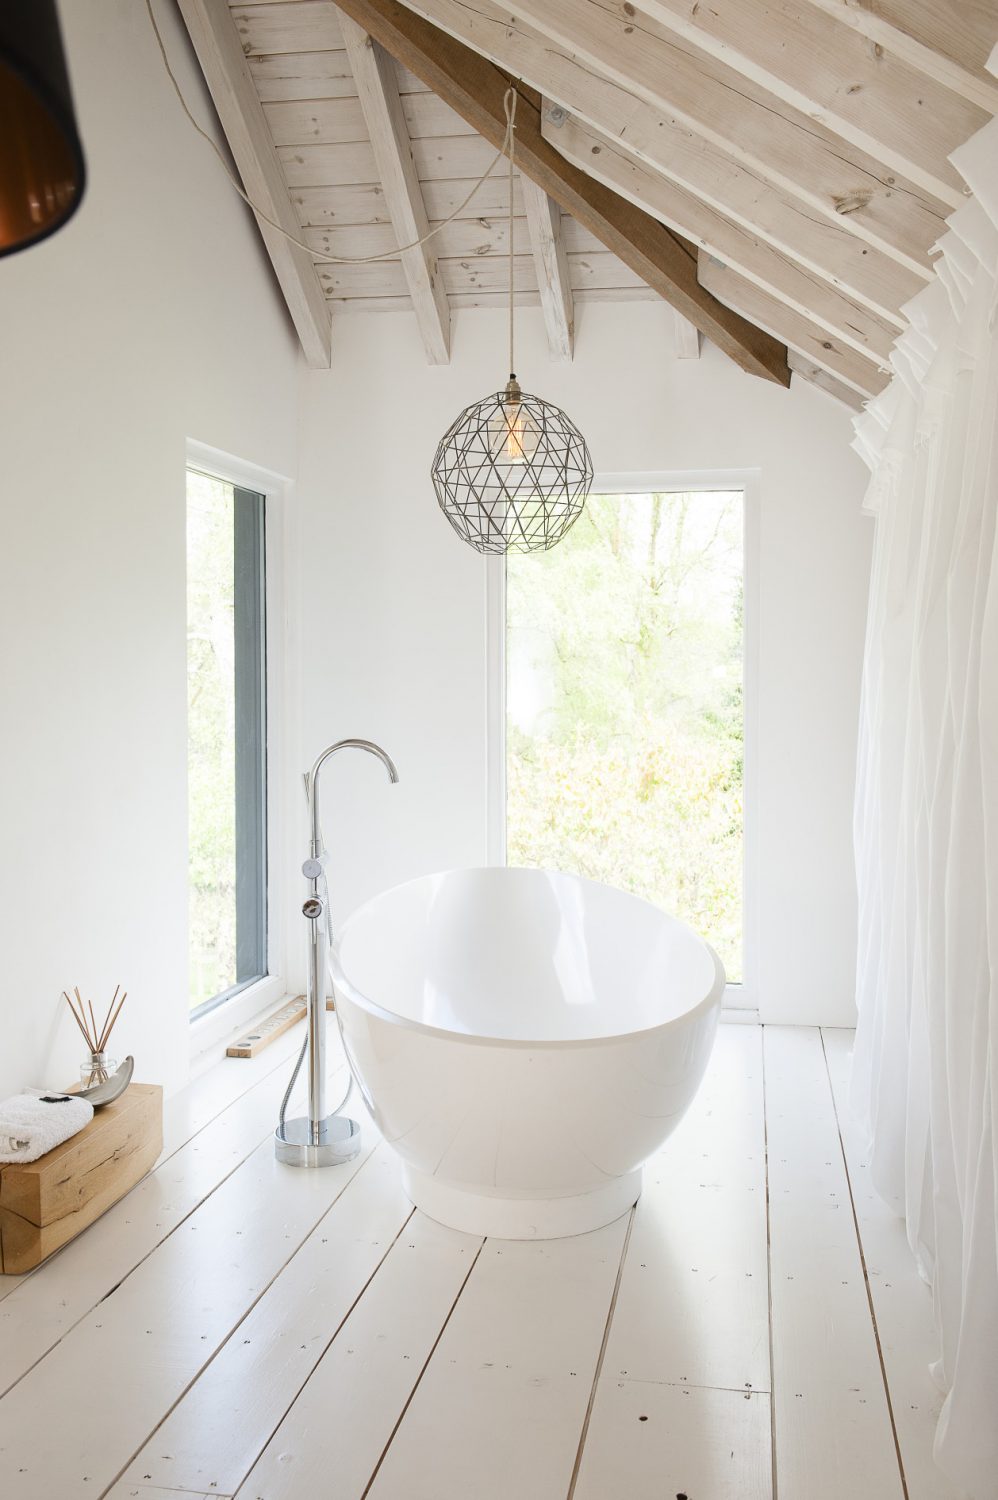 In one corner of the master bedroom a contemporary free-standing bath has been set in a double-aspect alcove overlooking the garden while at the other end is a spacious wet room